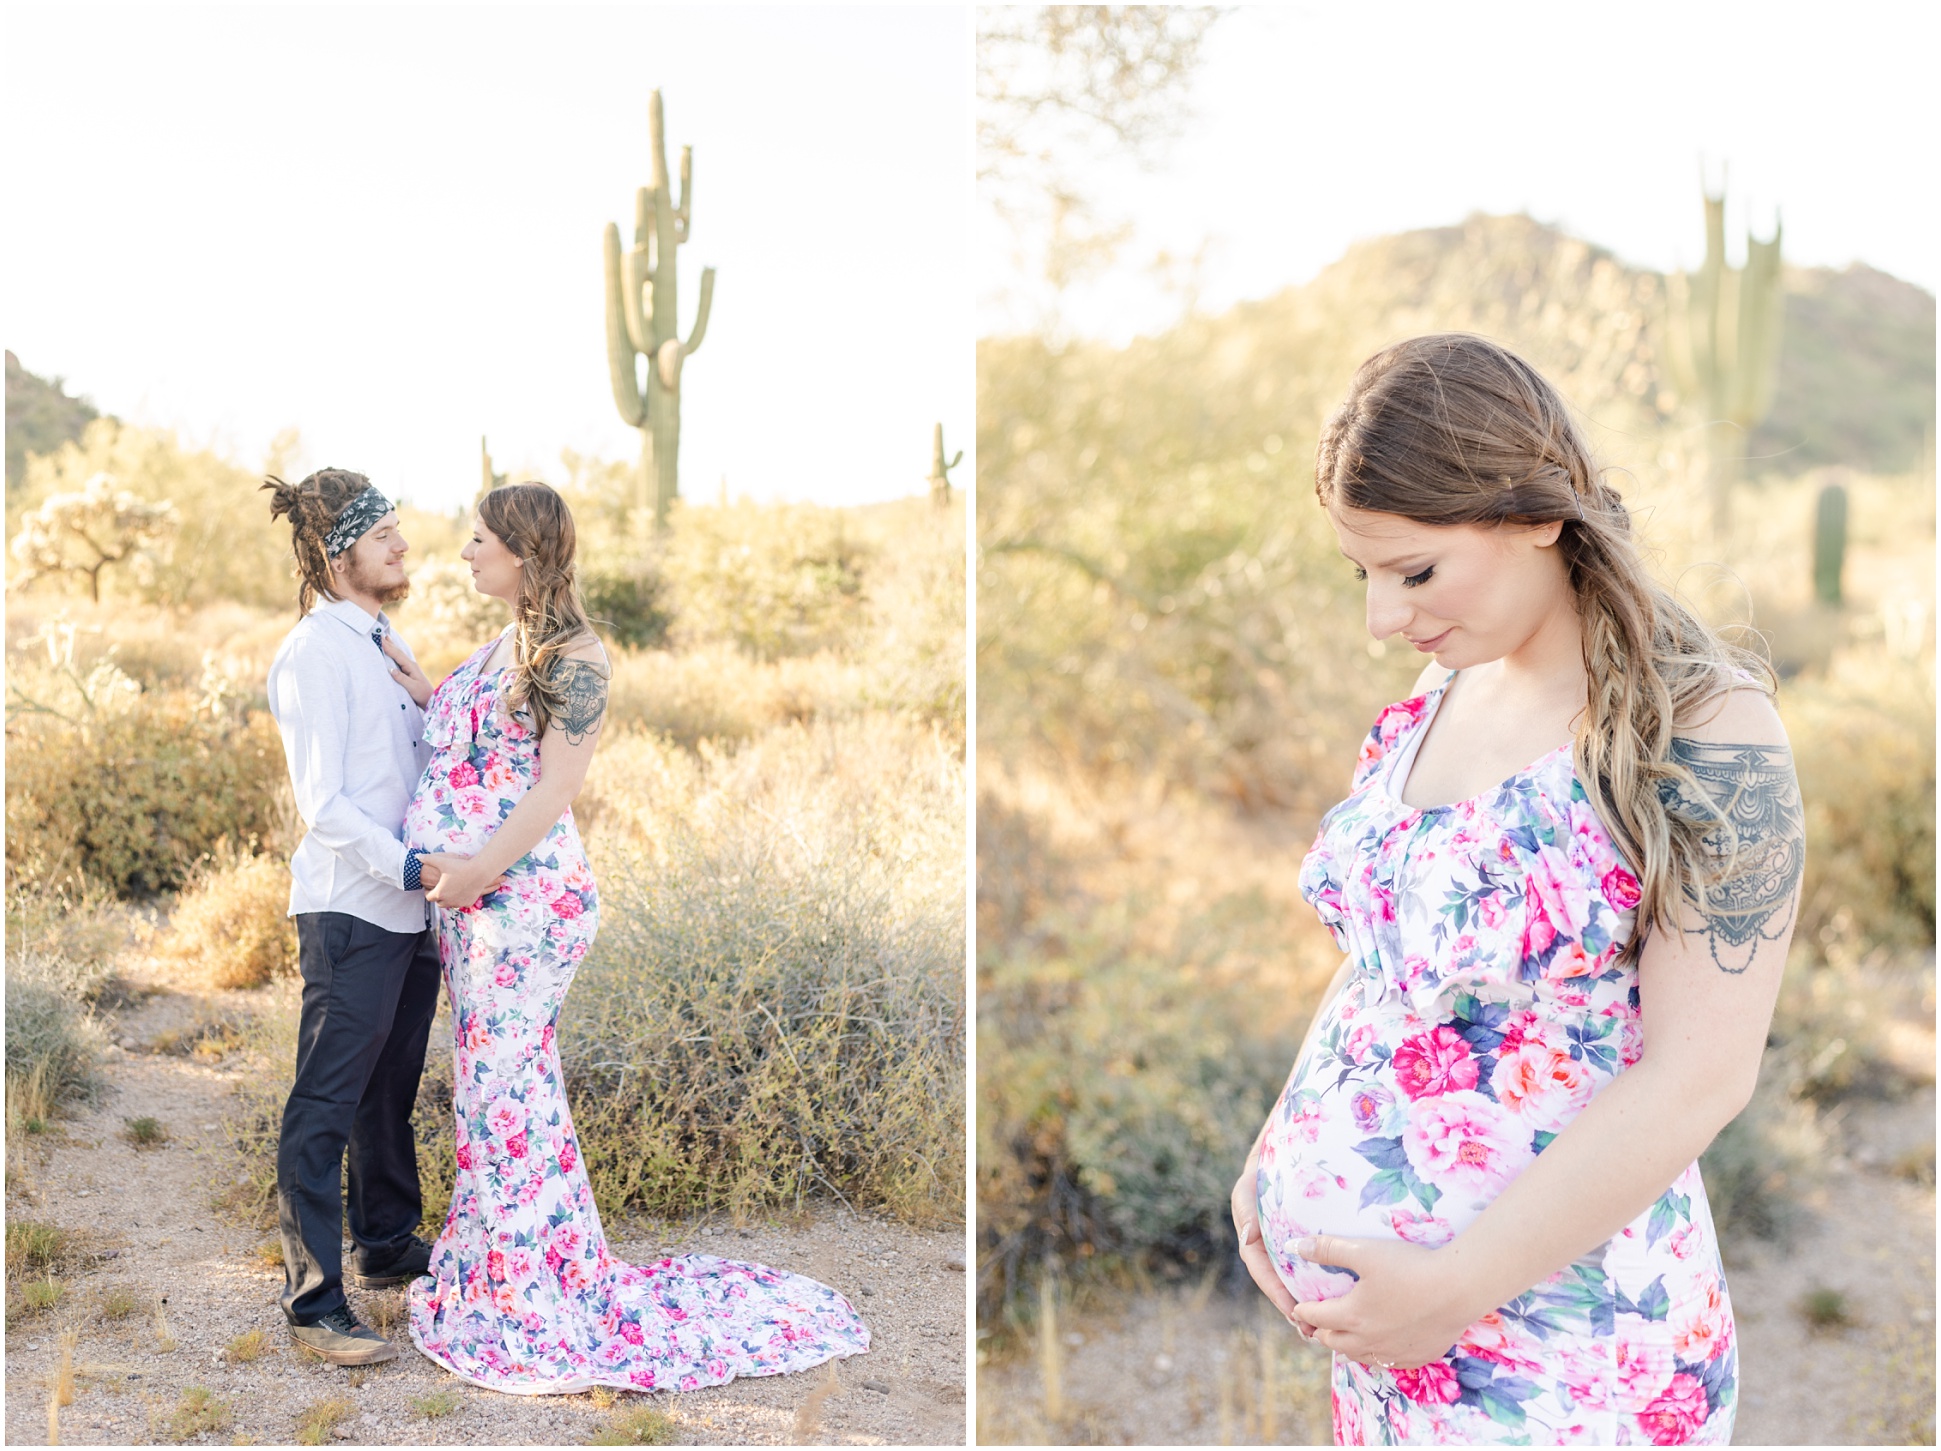 Floral Maternity Gown on Mom-to-be who is 7 months pregnant